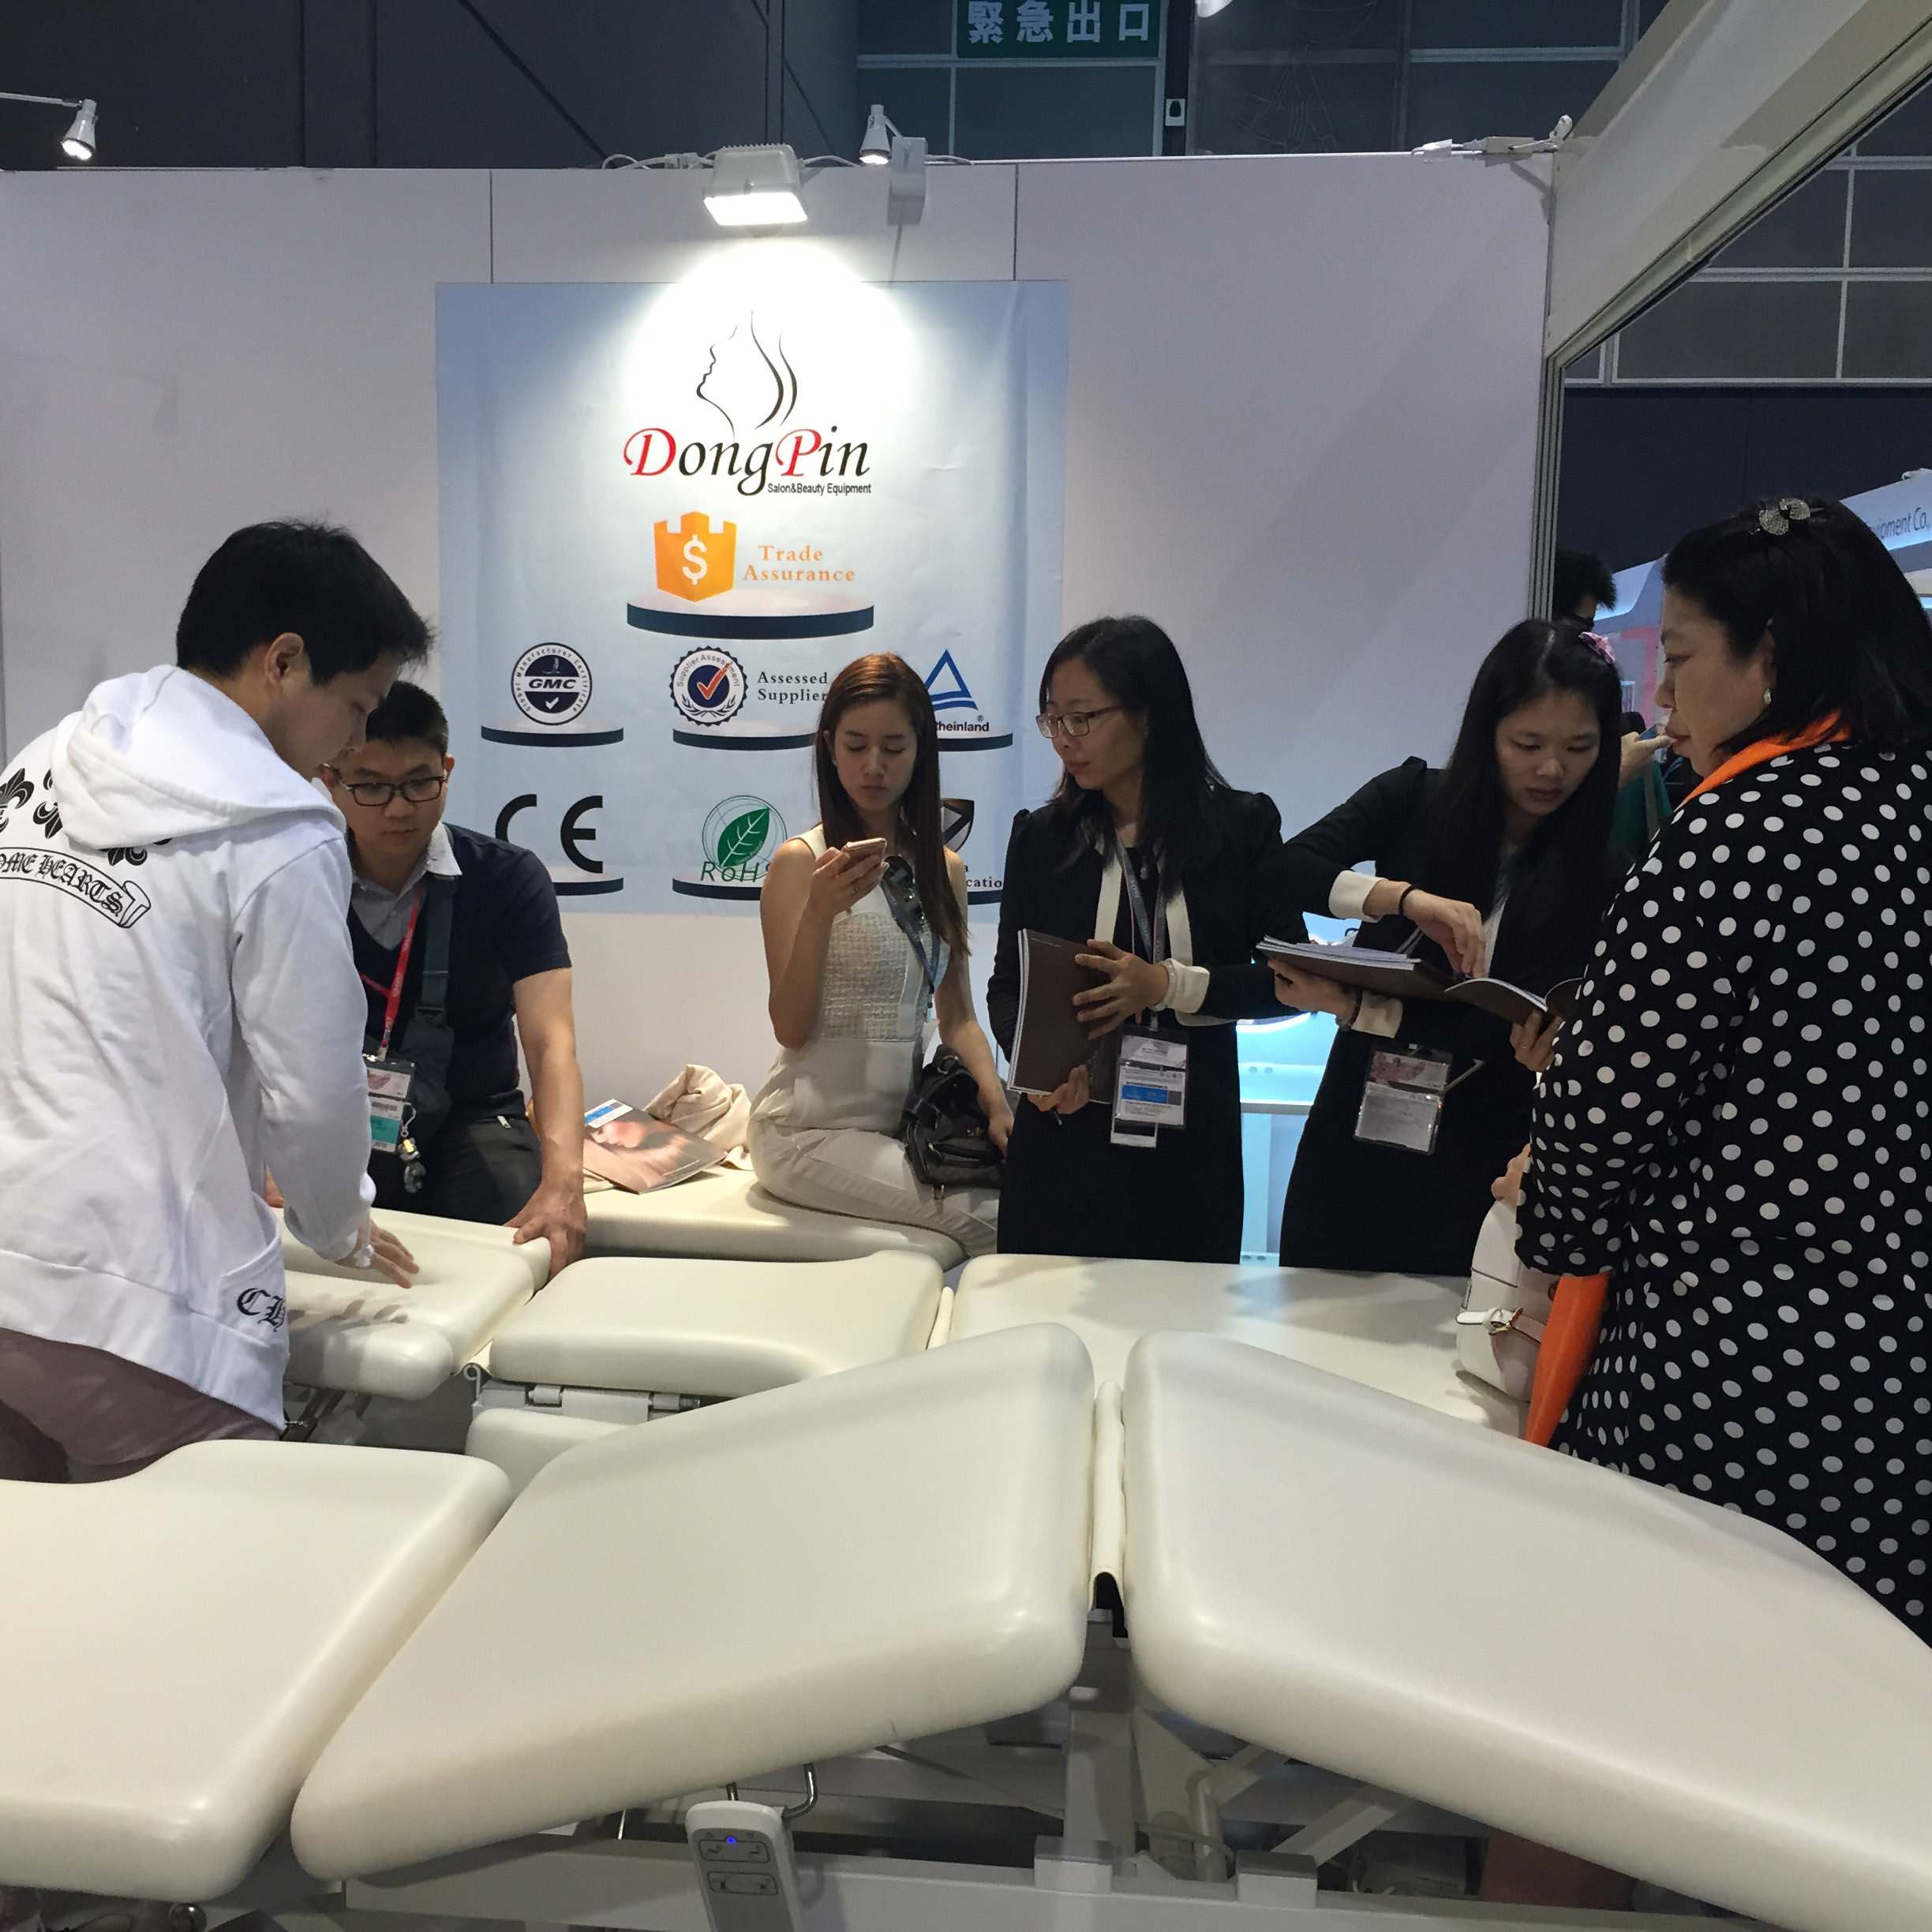 DongPin in the Cosmoprof Asia 2015